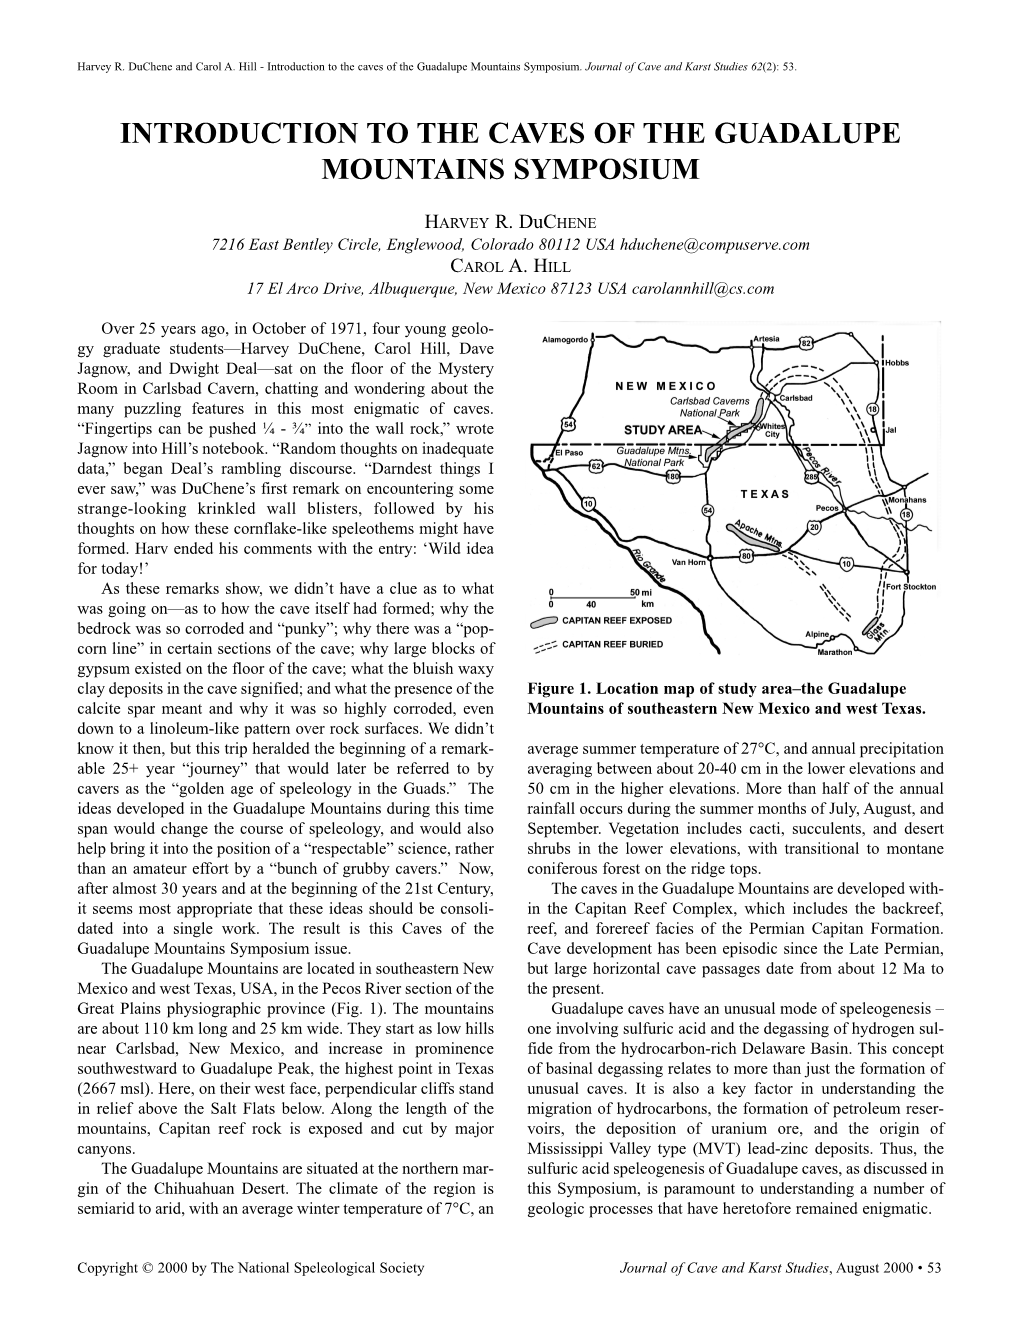 Introduction to the Caves of the Guadalupe Mountains Symposium